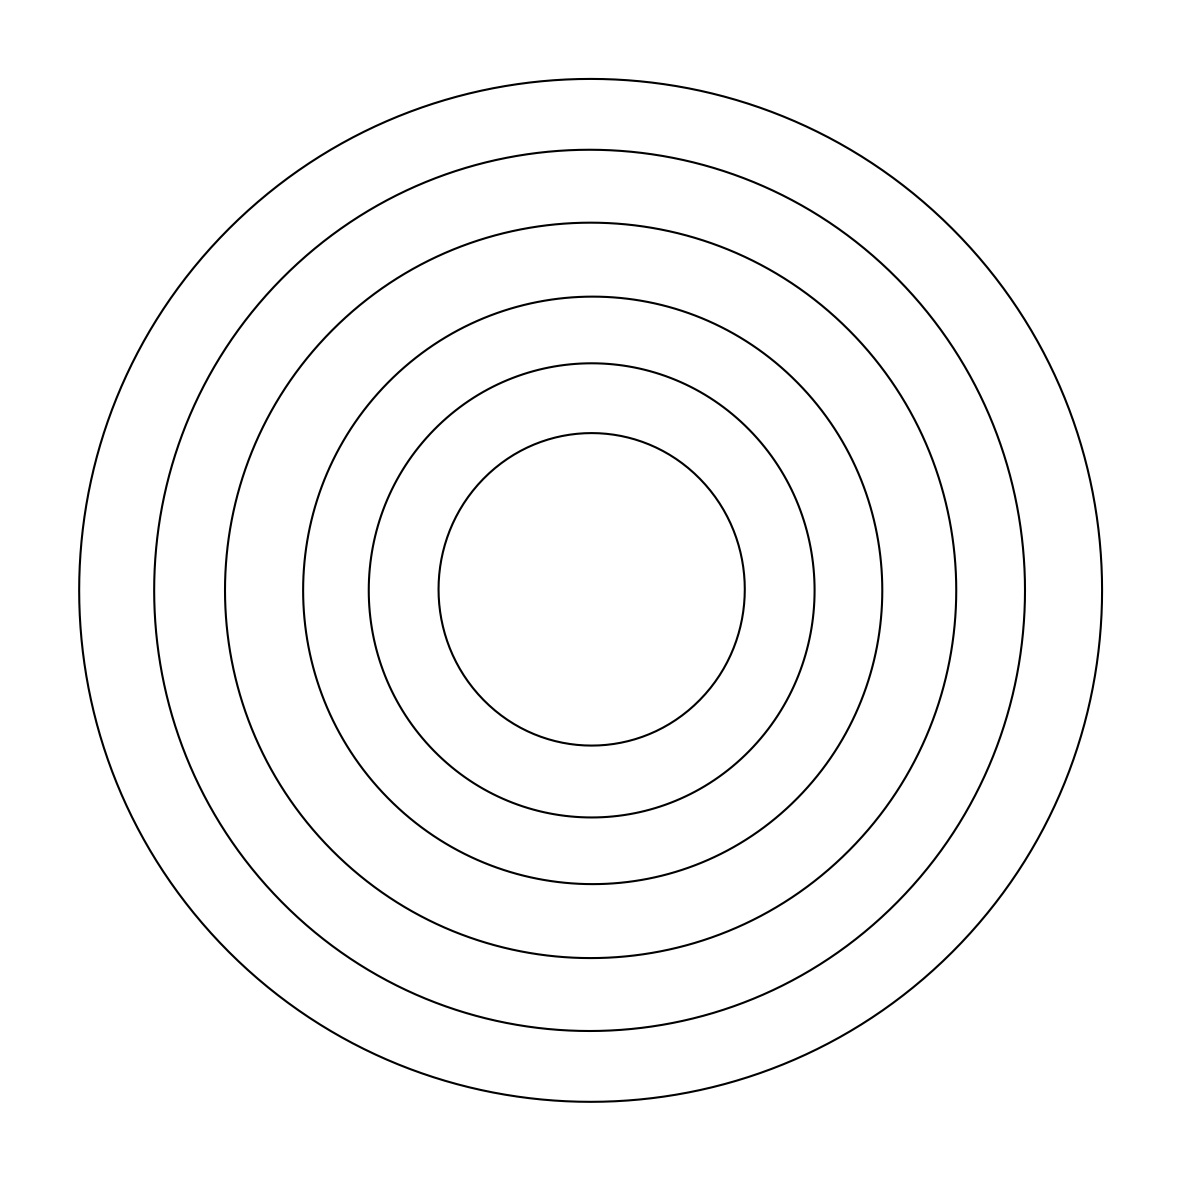 Editable Concentric Circles Template